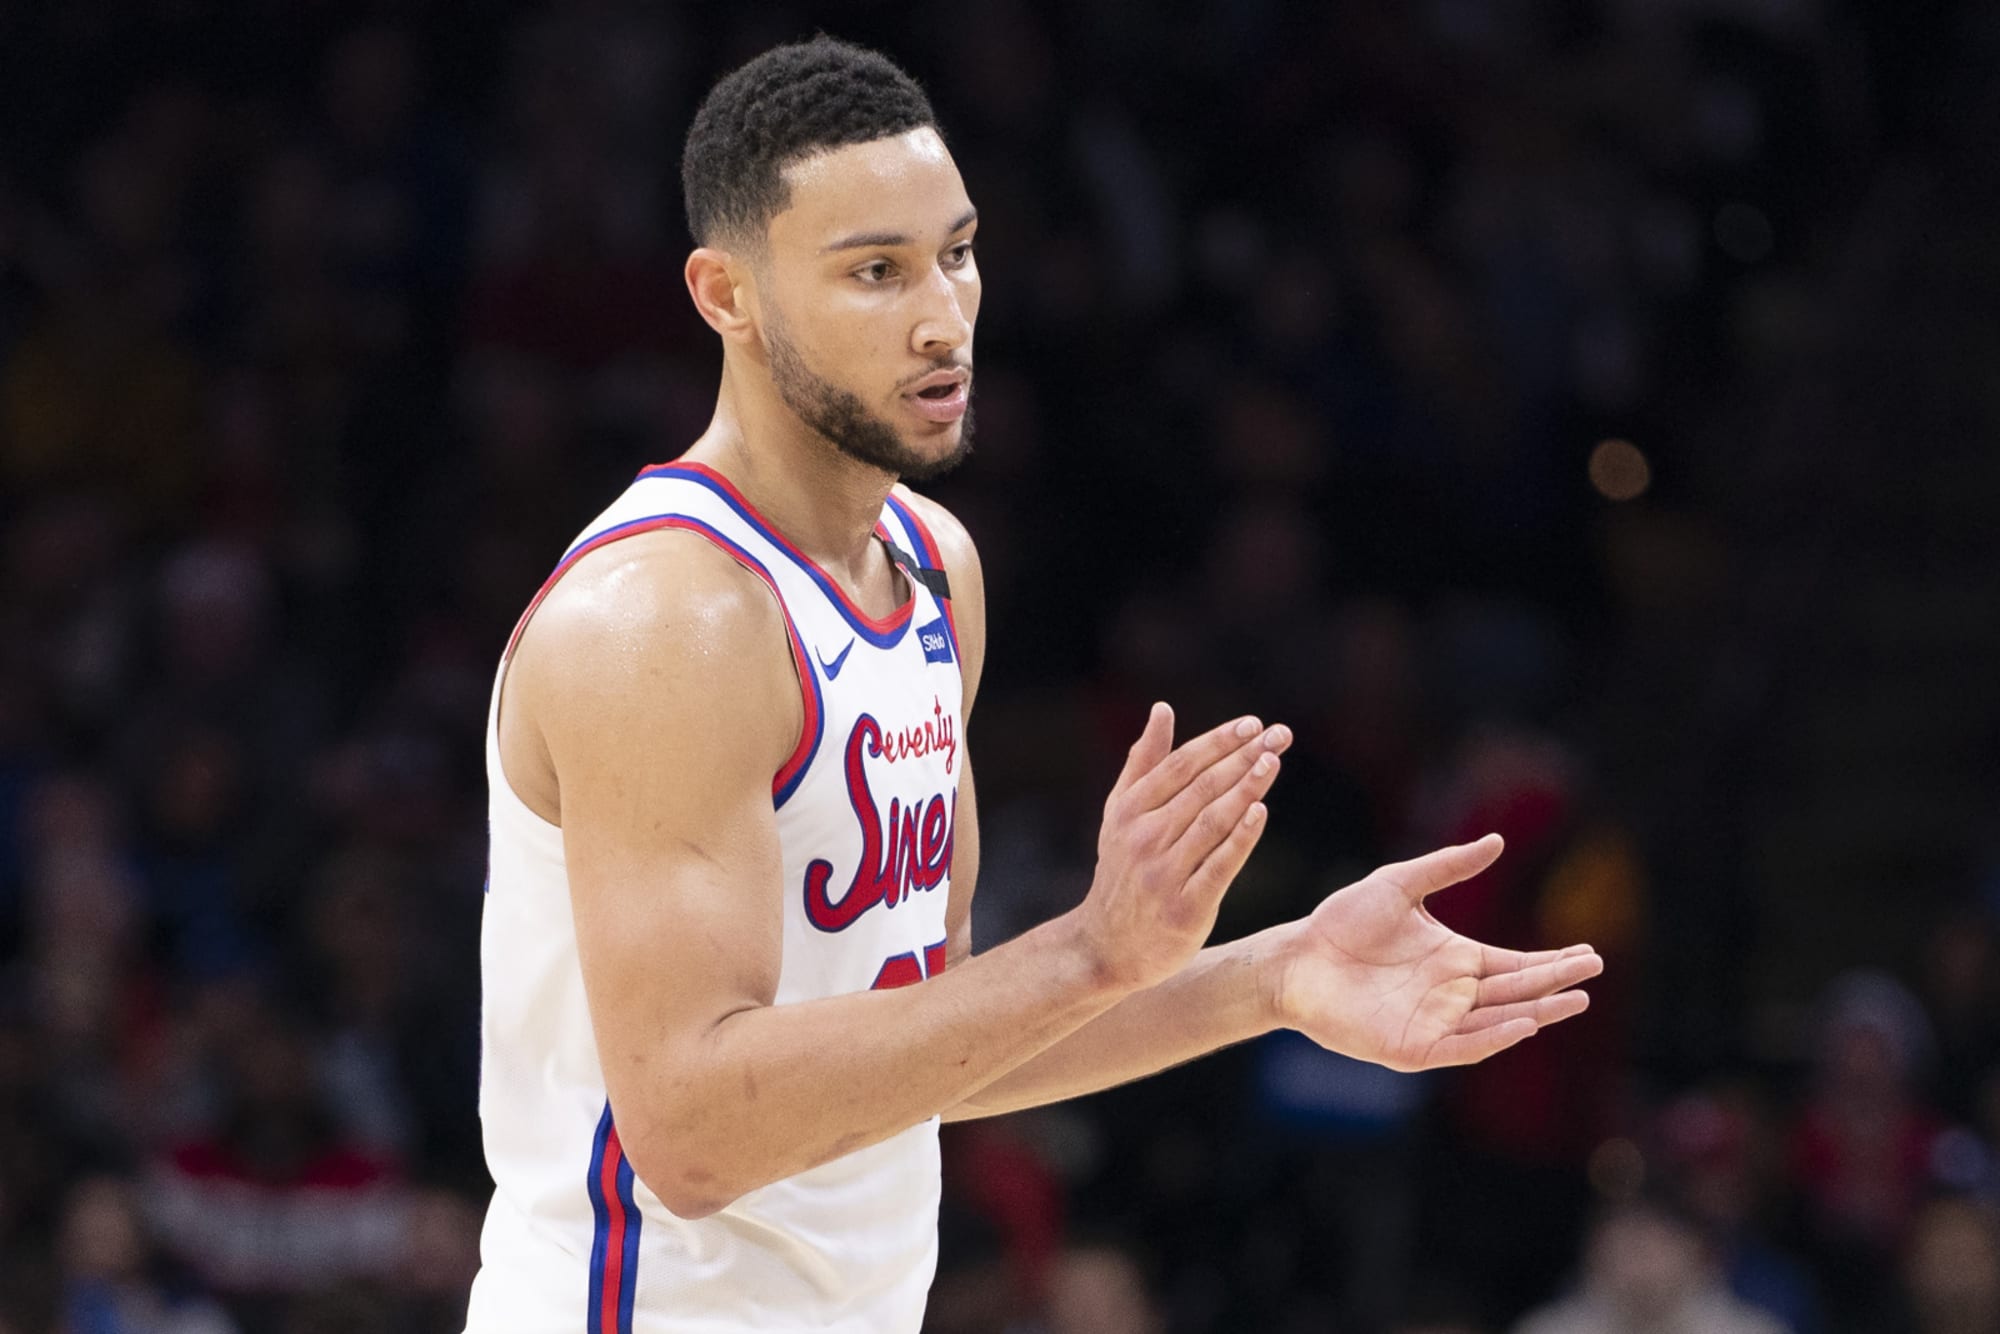 Sixers' Ben Simmons has solidified himself as one of the NBA's